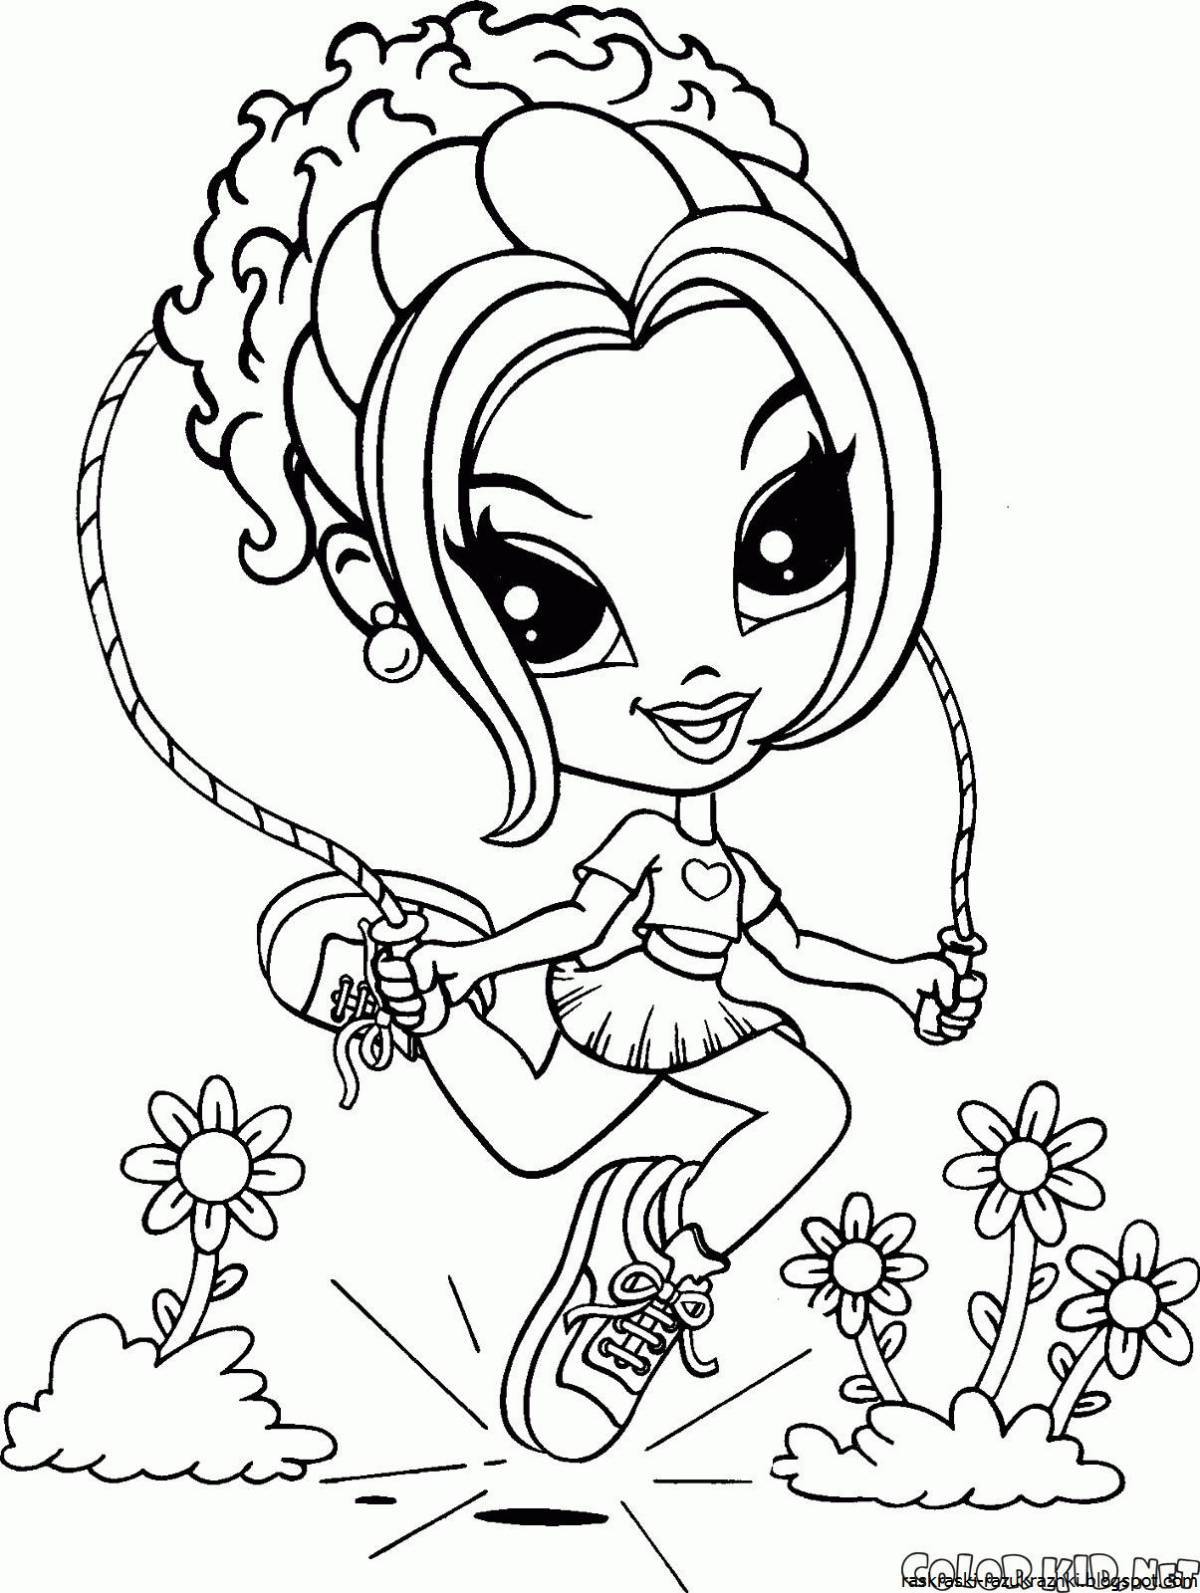 Fun coloring book for girls 5-6 years old